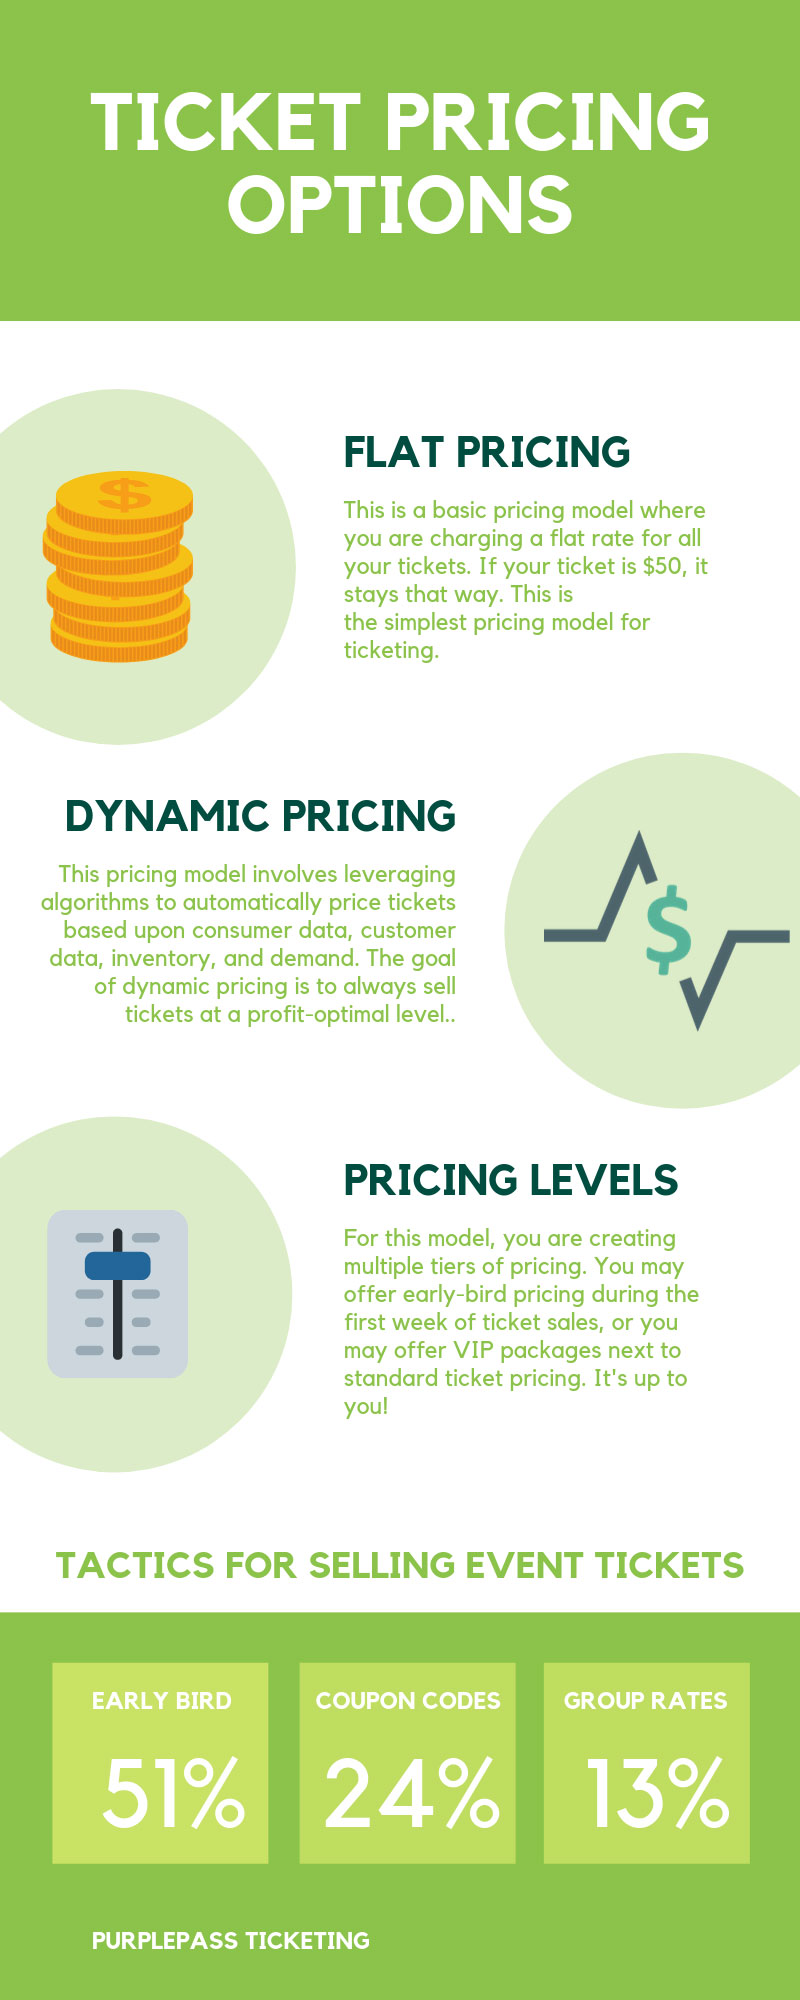 an event ticket pricing models